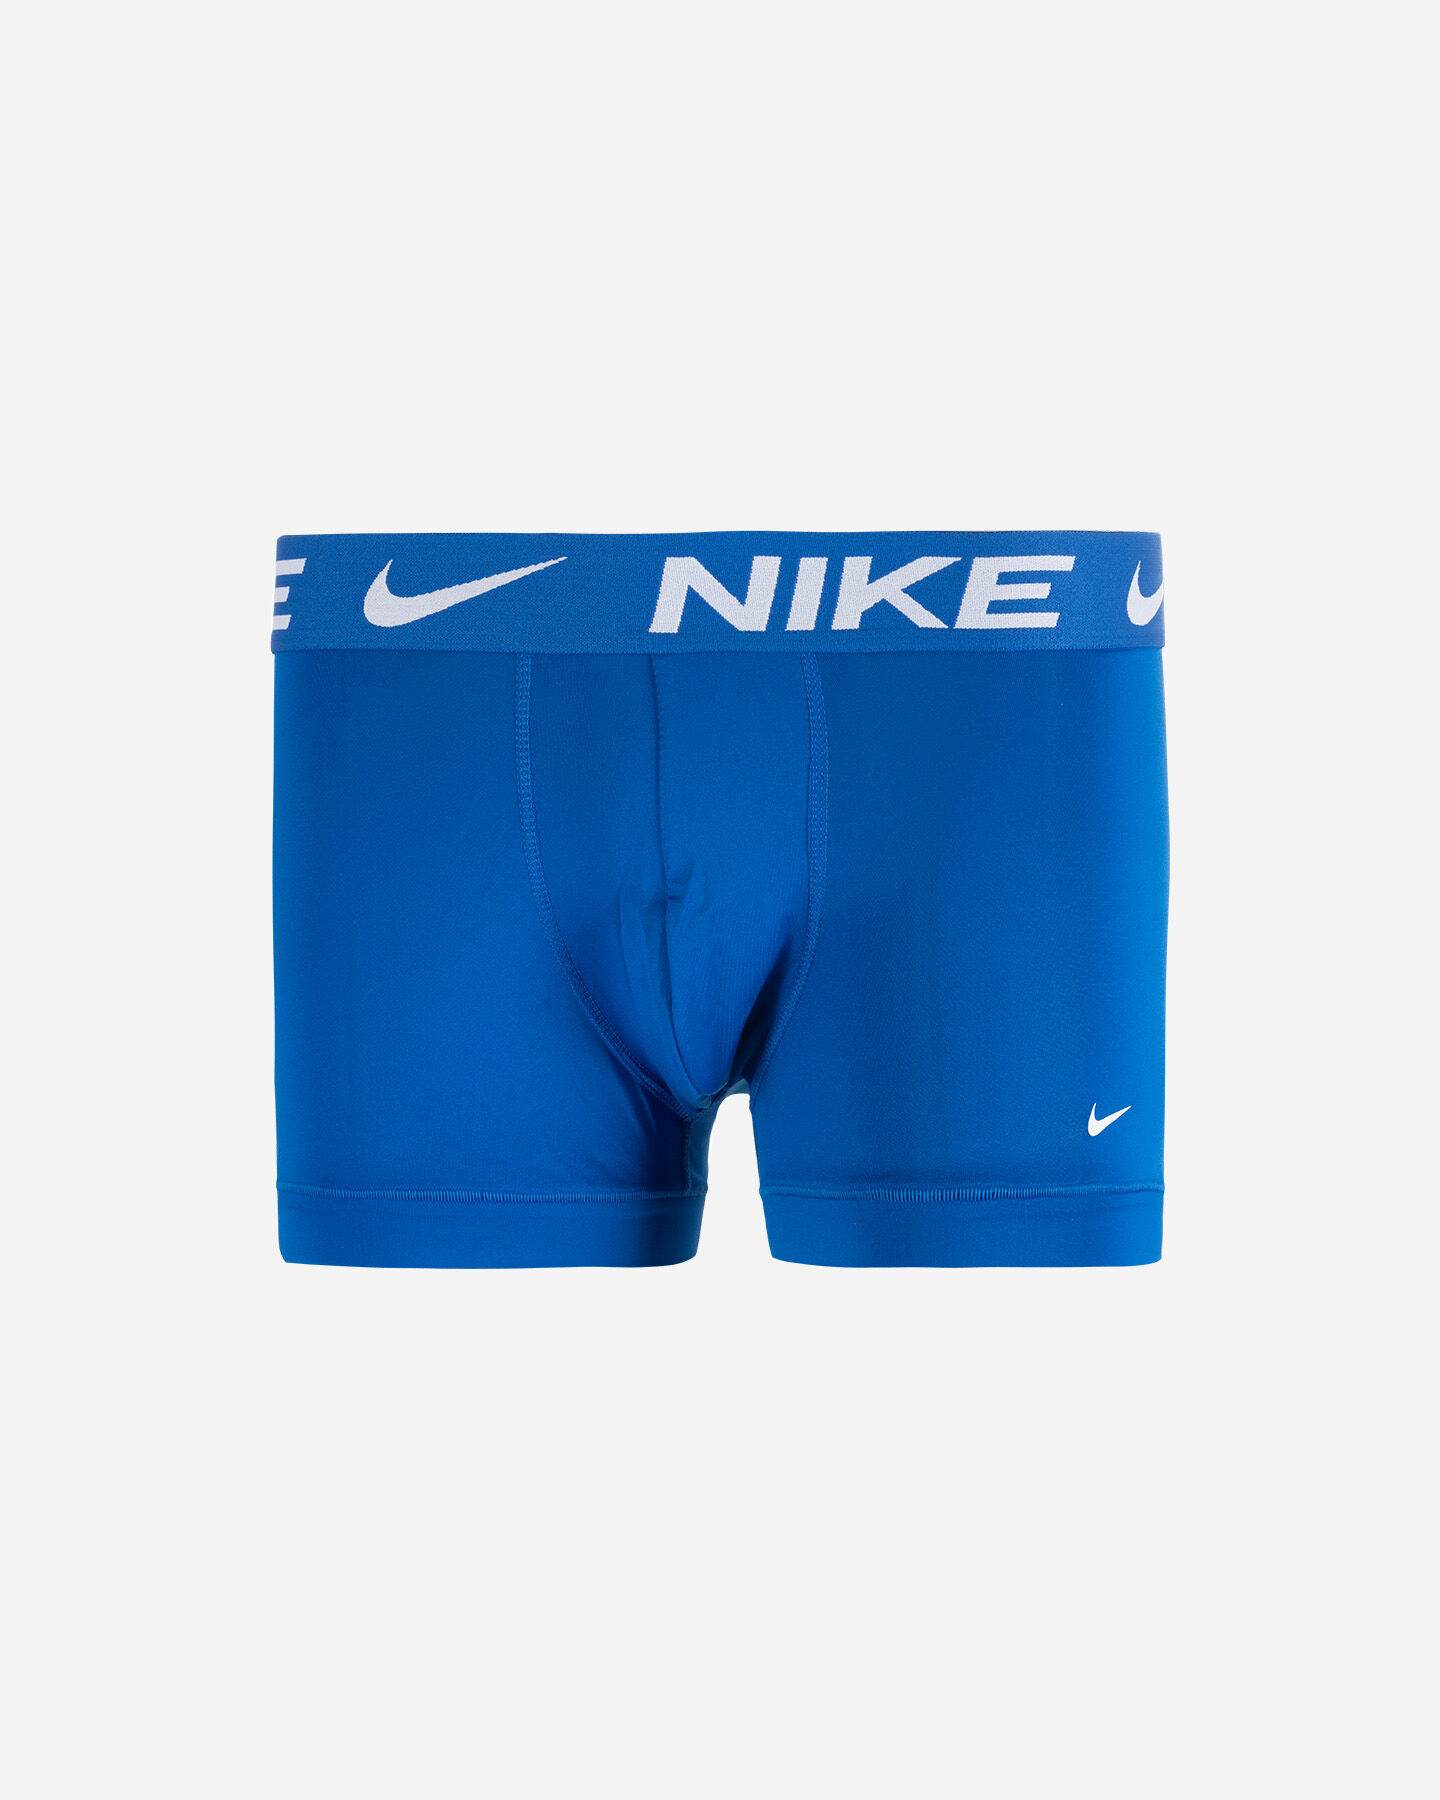  Intimo NIKE 3 PACK BOXER DRI-FIT M S4110507|1M5|S scatto 2